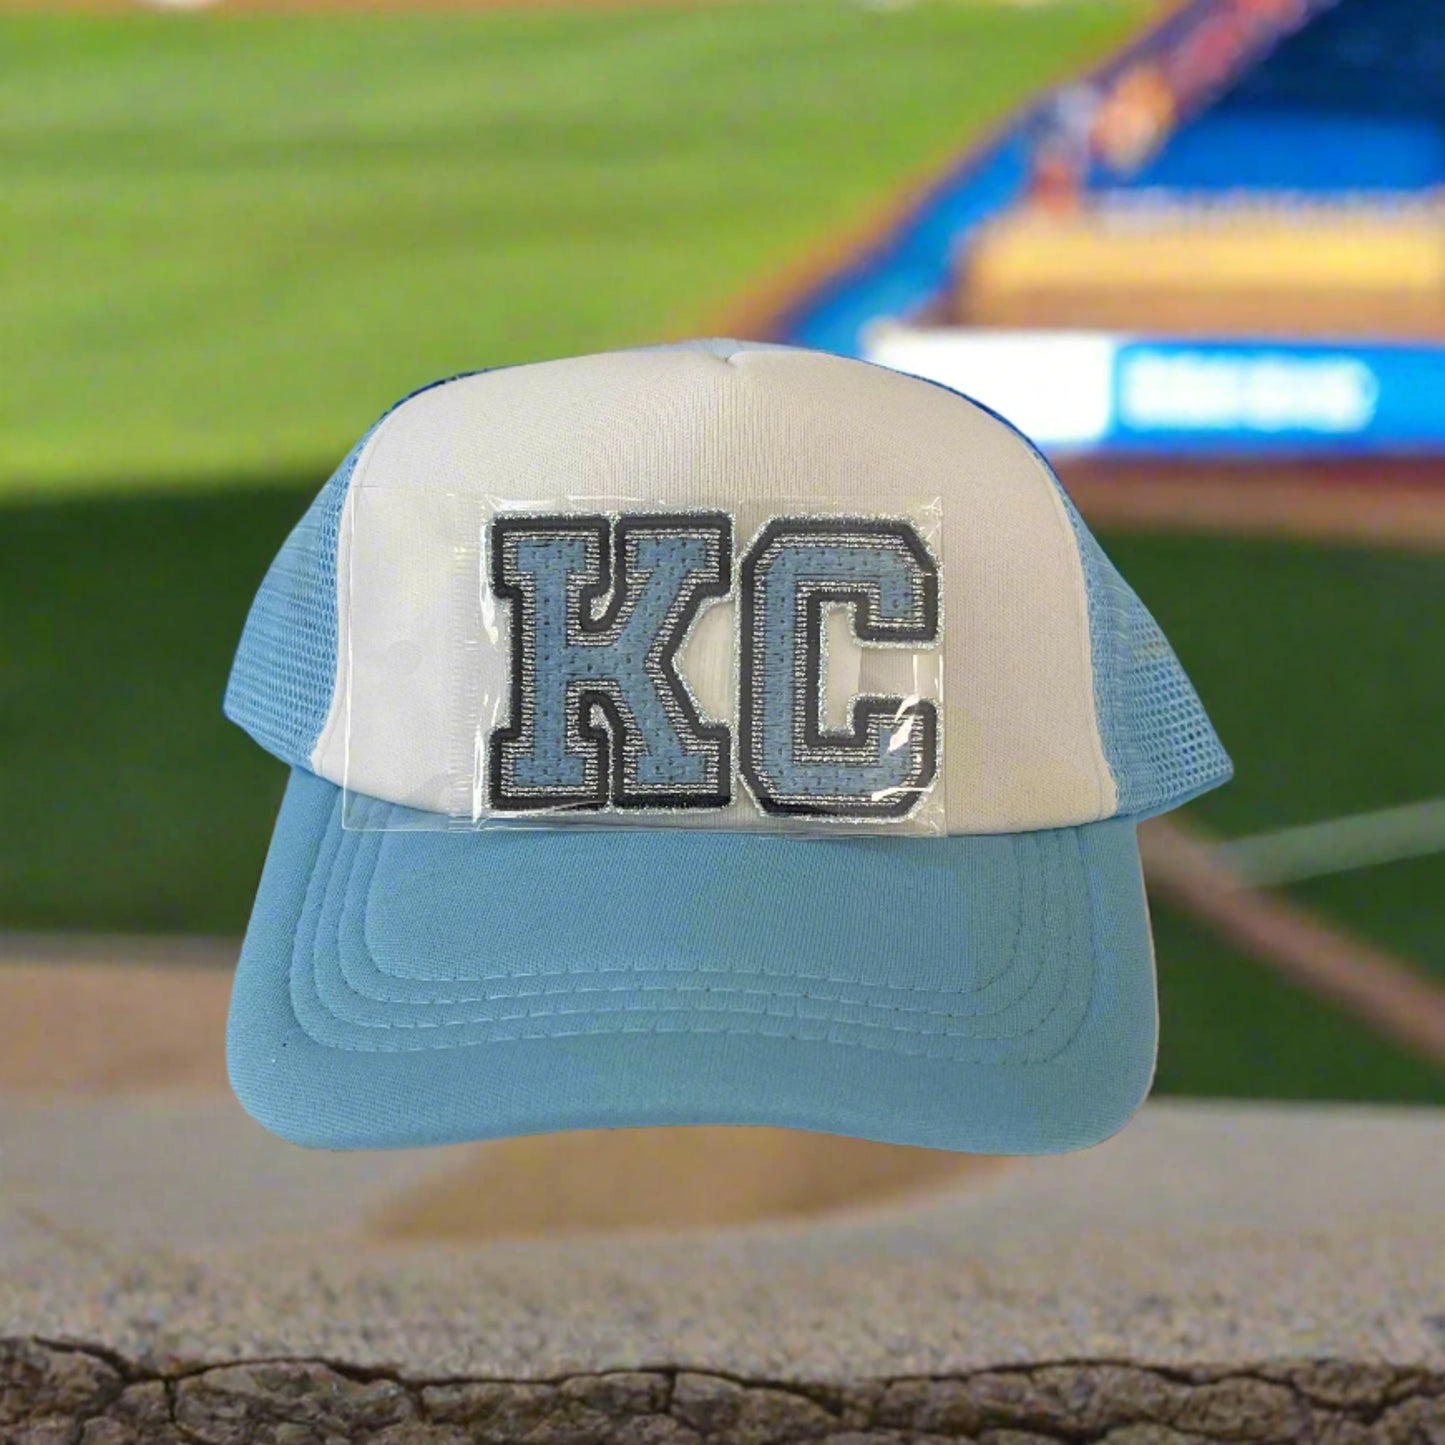 Iron-on patch featuring bold "KC" letters in Kansas City Royals and Sporting KC colors, showcasing a stylish and vibrant aesthetic.